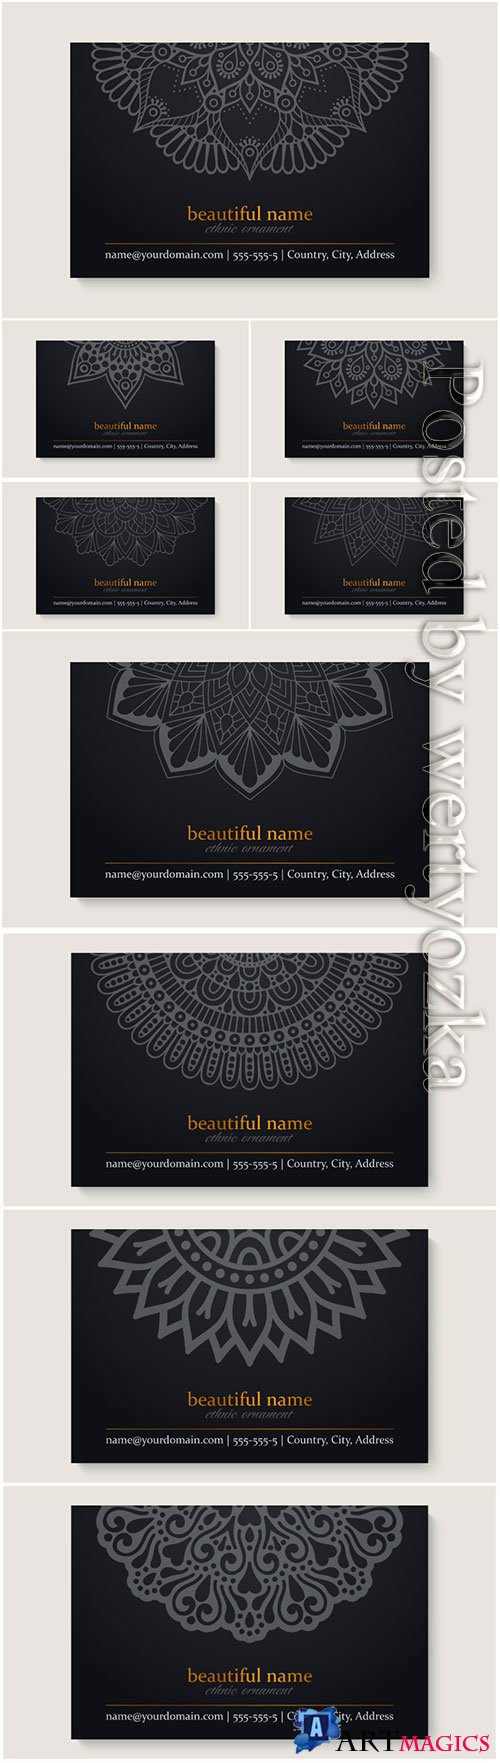 Business vector card template with ethnic mandala design